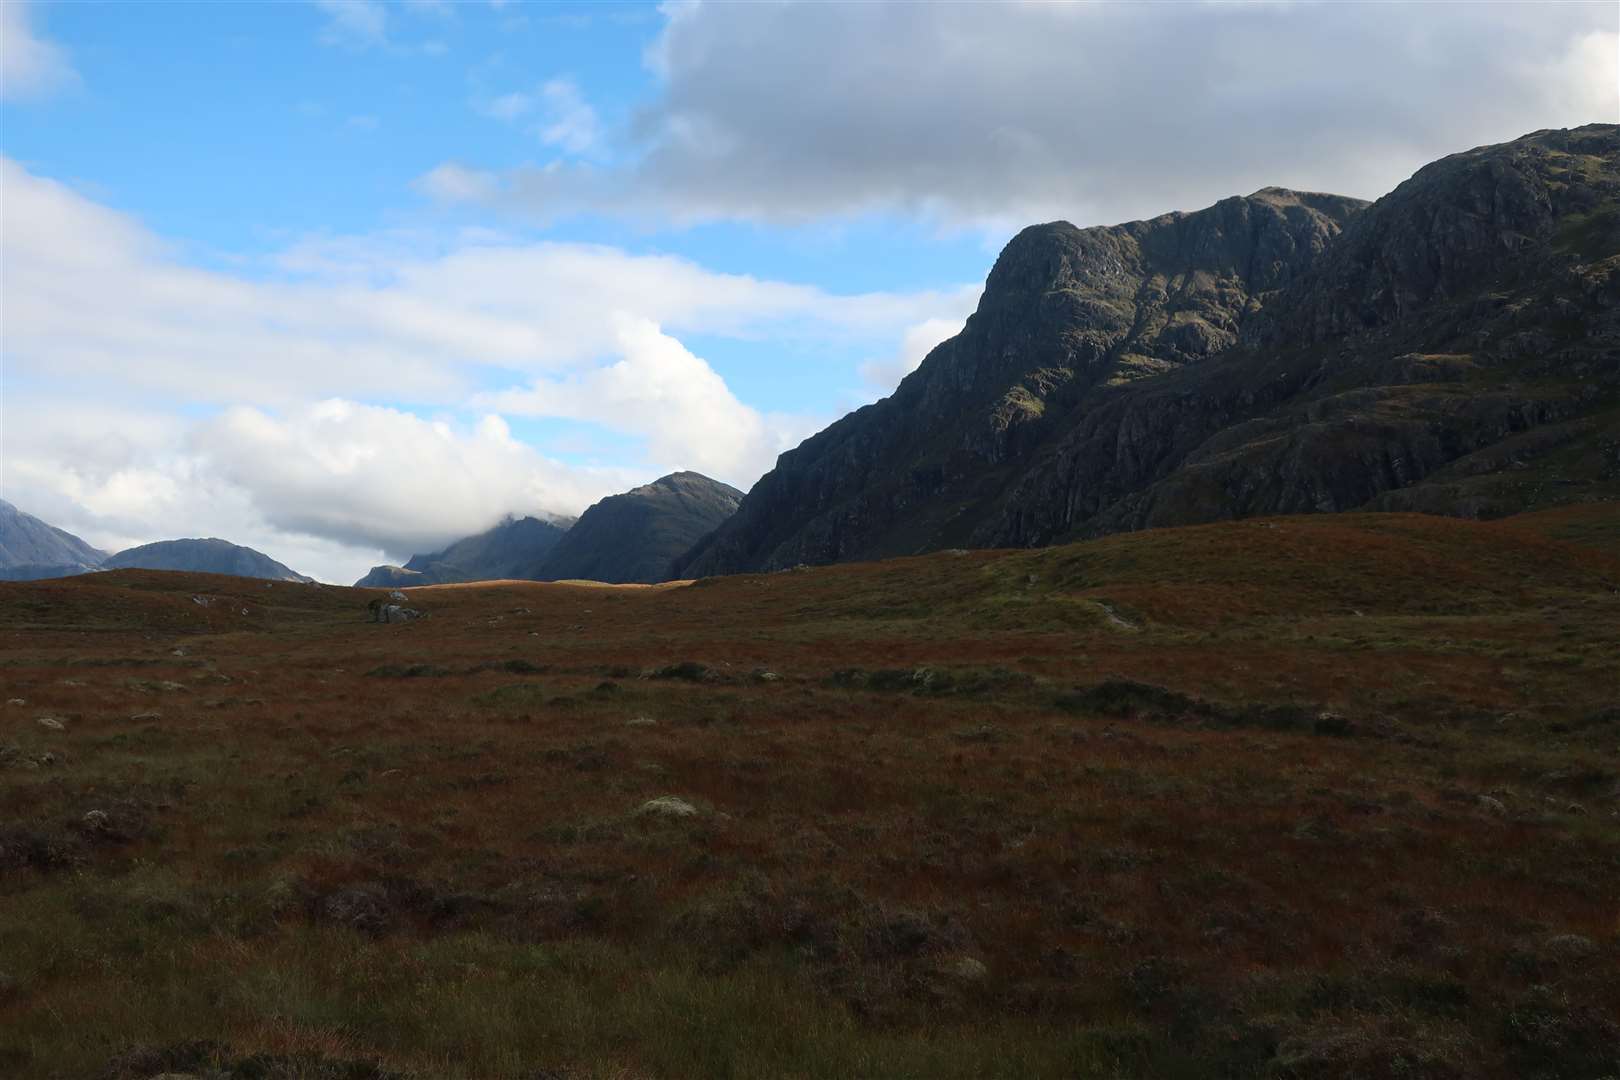 Looking towards the cliffs of Beinn Airigh Charr from the stalkers' path.